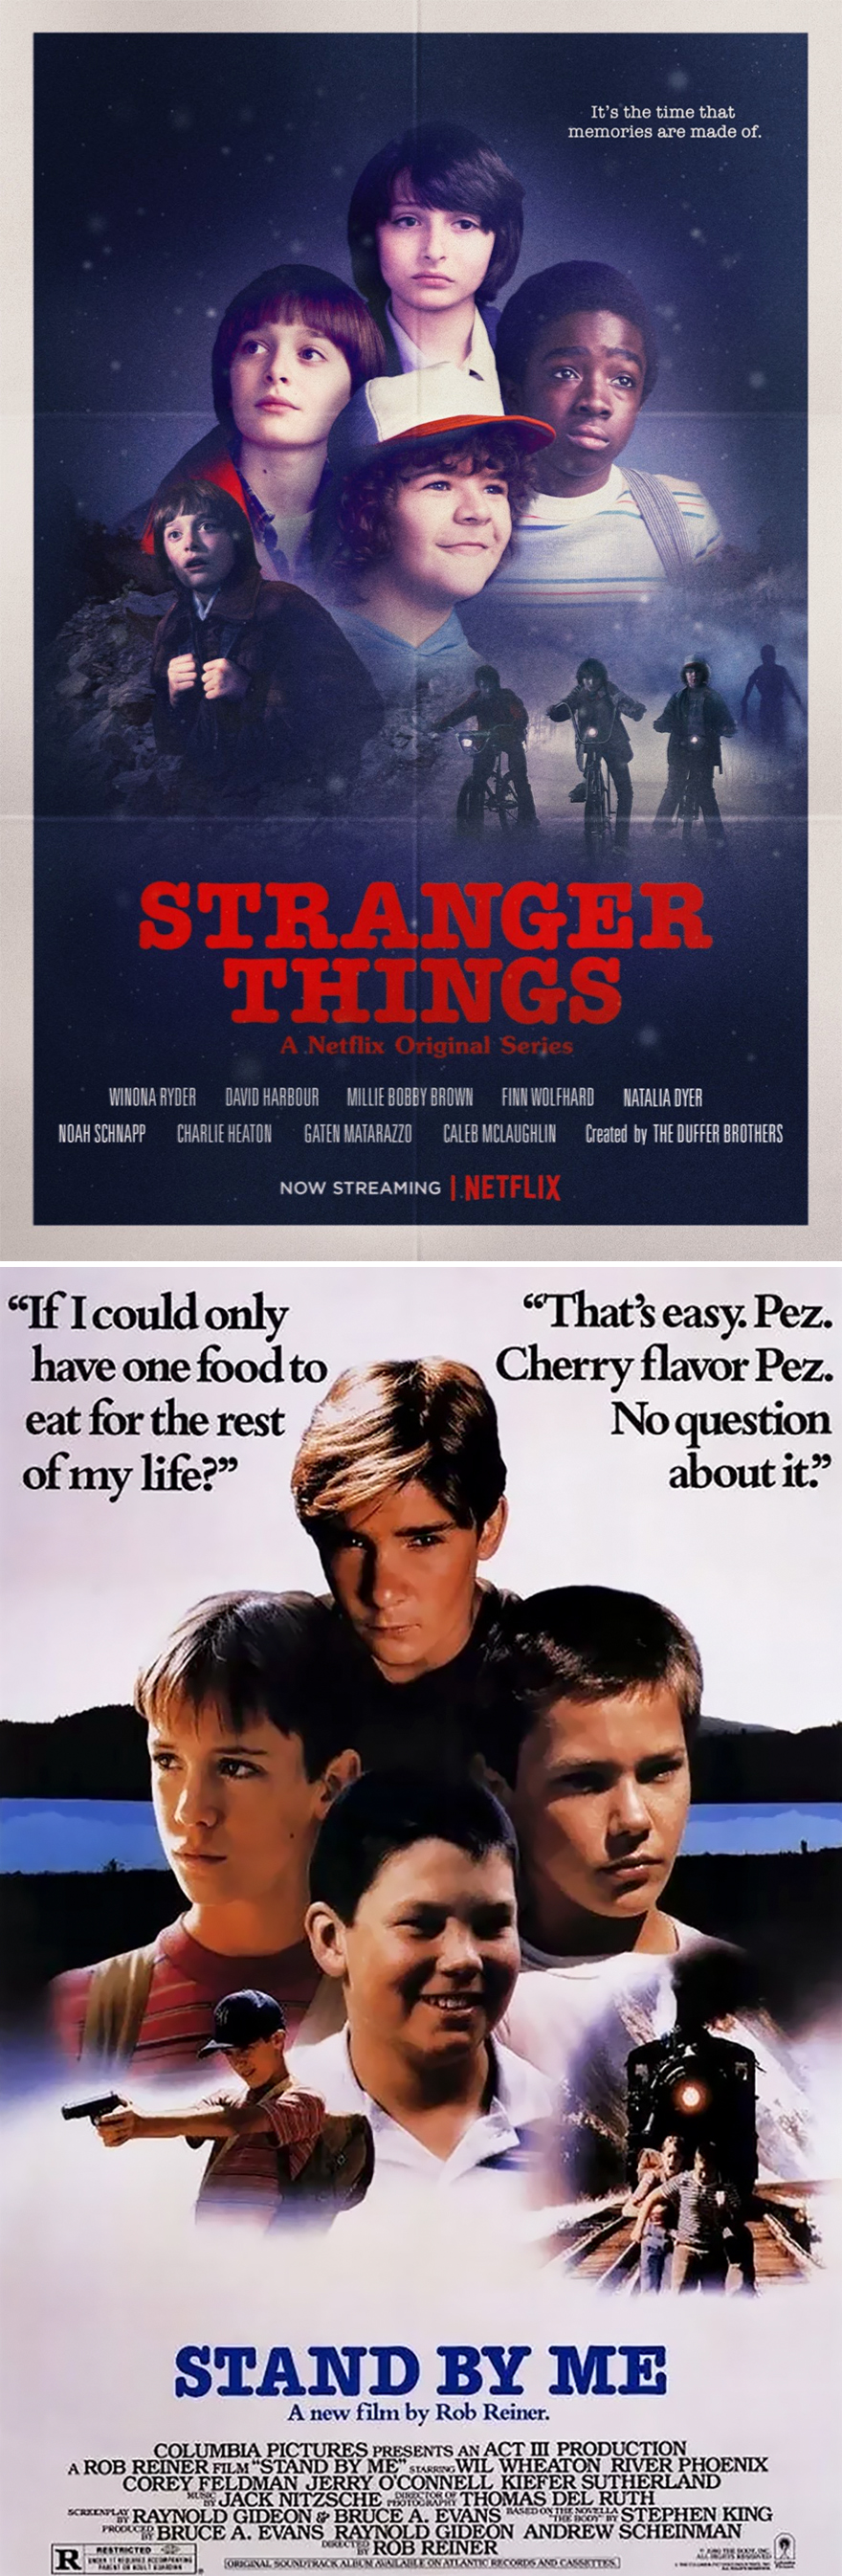 classic-80s-movie-posters-netflix-stranger-things-3-59bfb6b919319__880 | Comix Aggressive